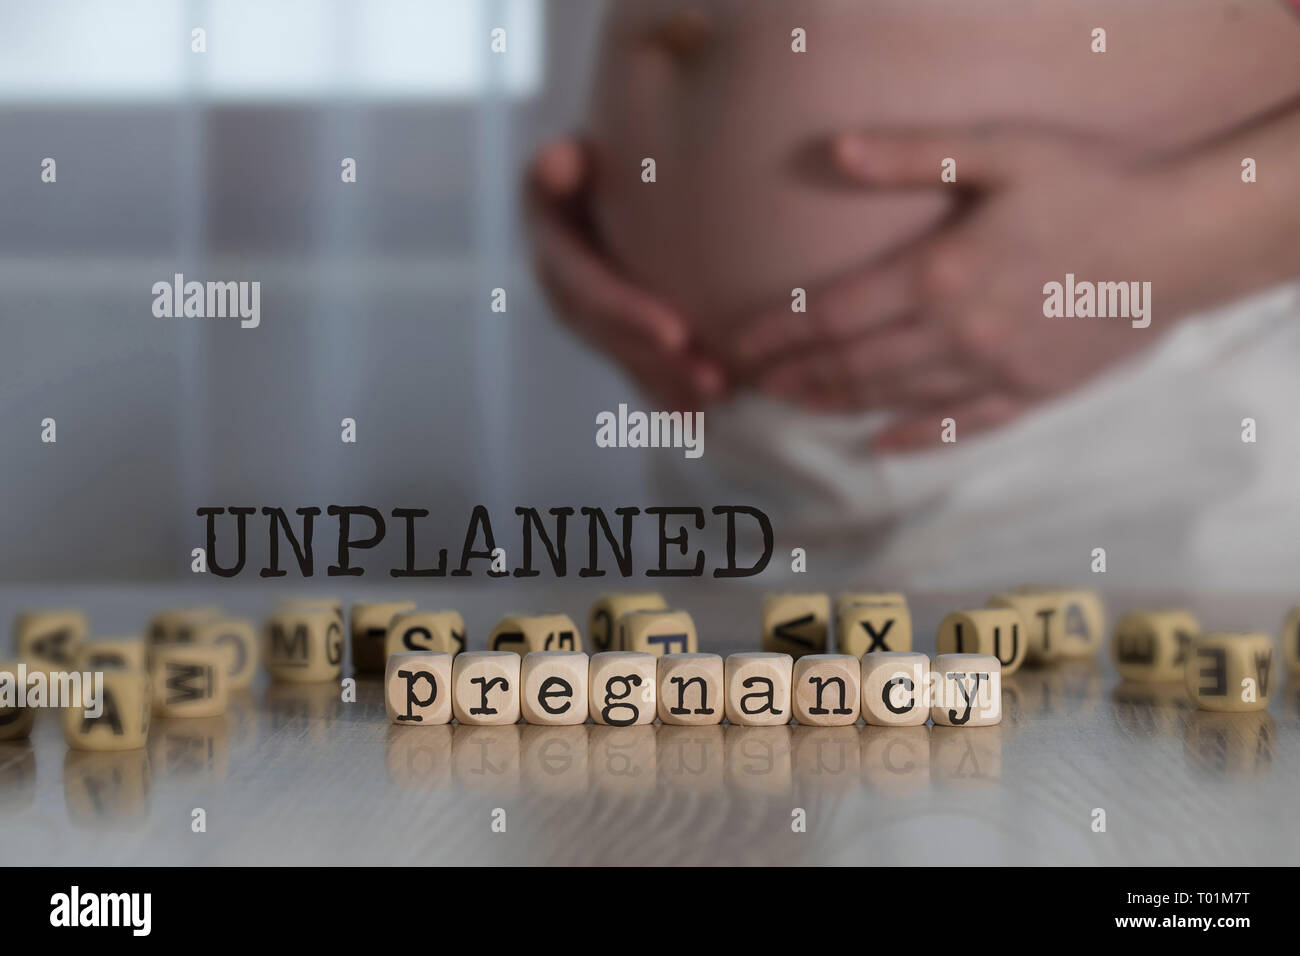 Words UNPLANNED PREGNANCY composed of wooden letters. Pregnant woman in the background Stock Photo